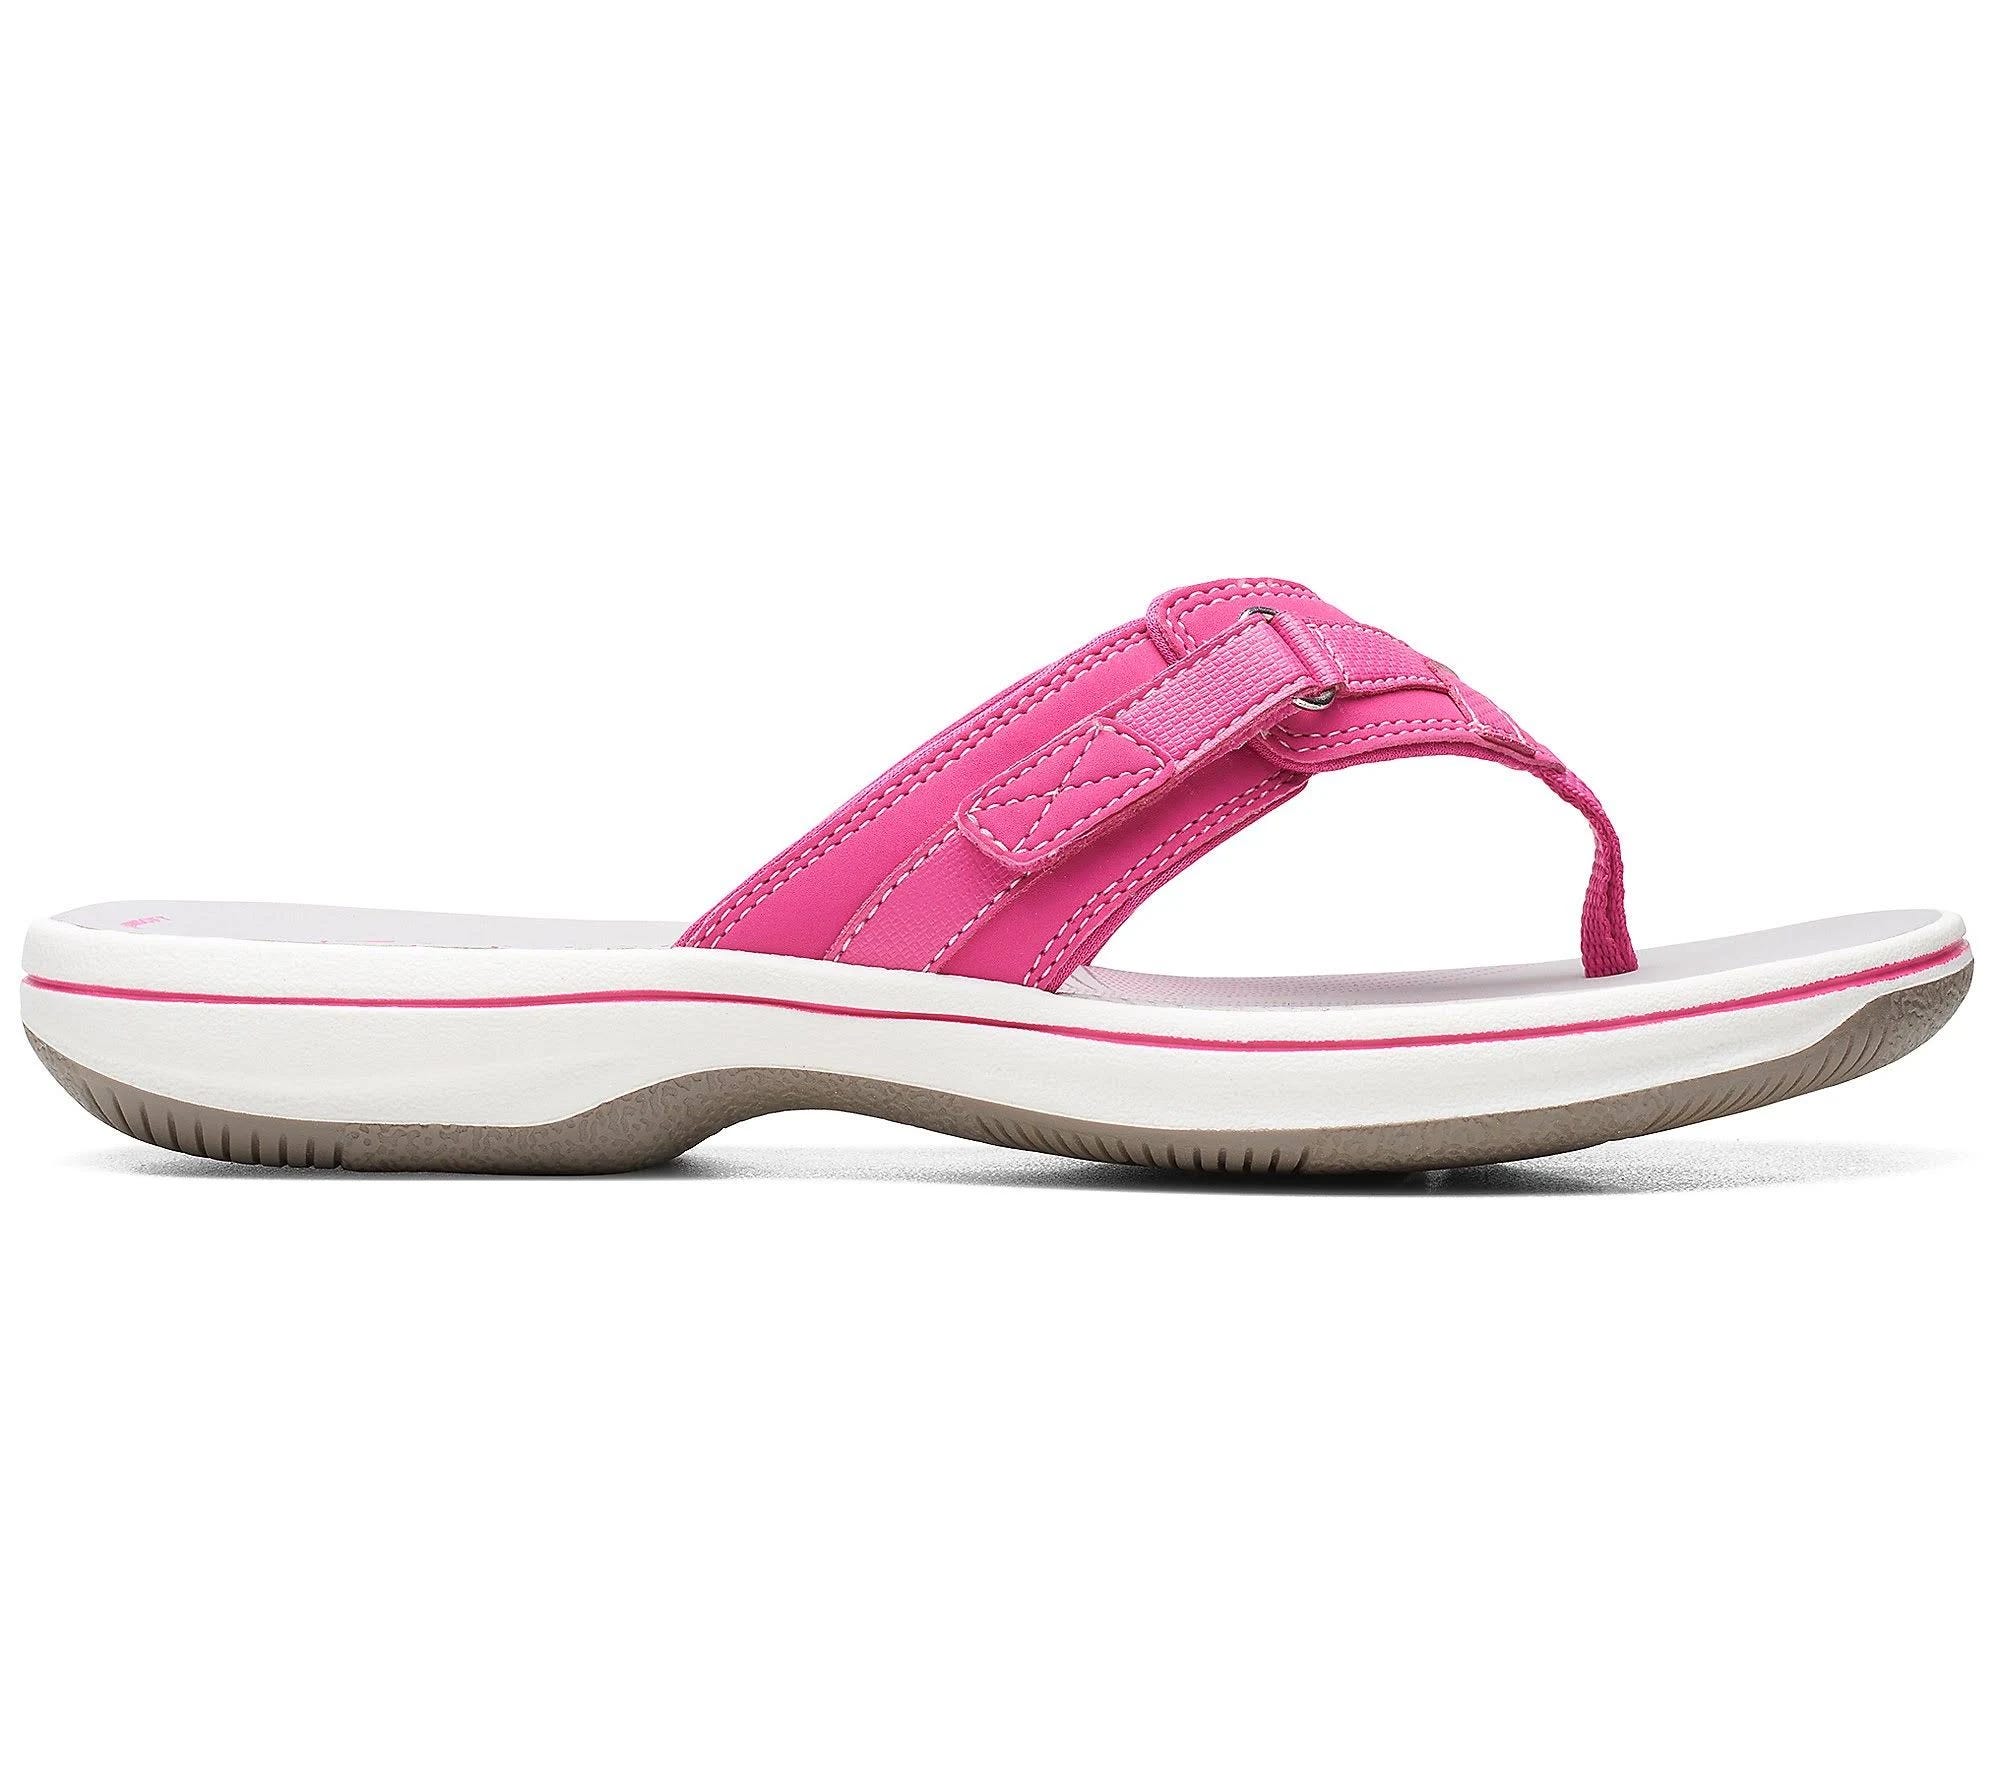 Comfortable Pink Thong Sandal with Textile Lining | Image